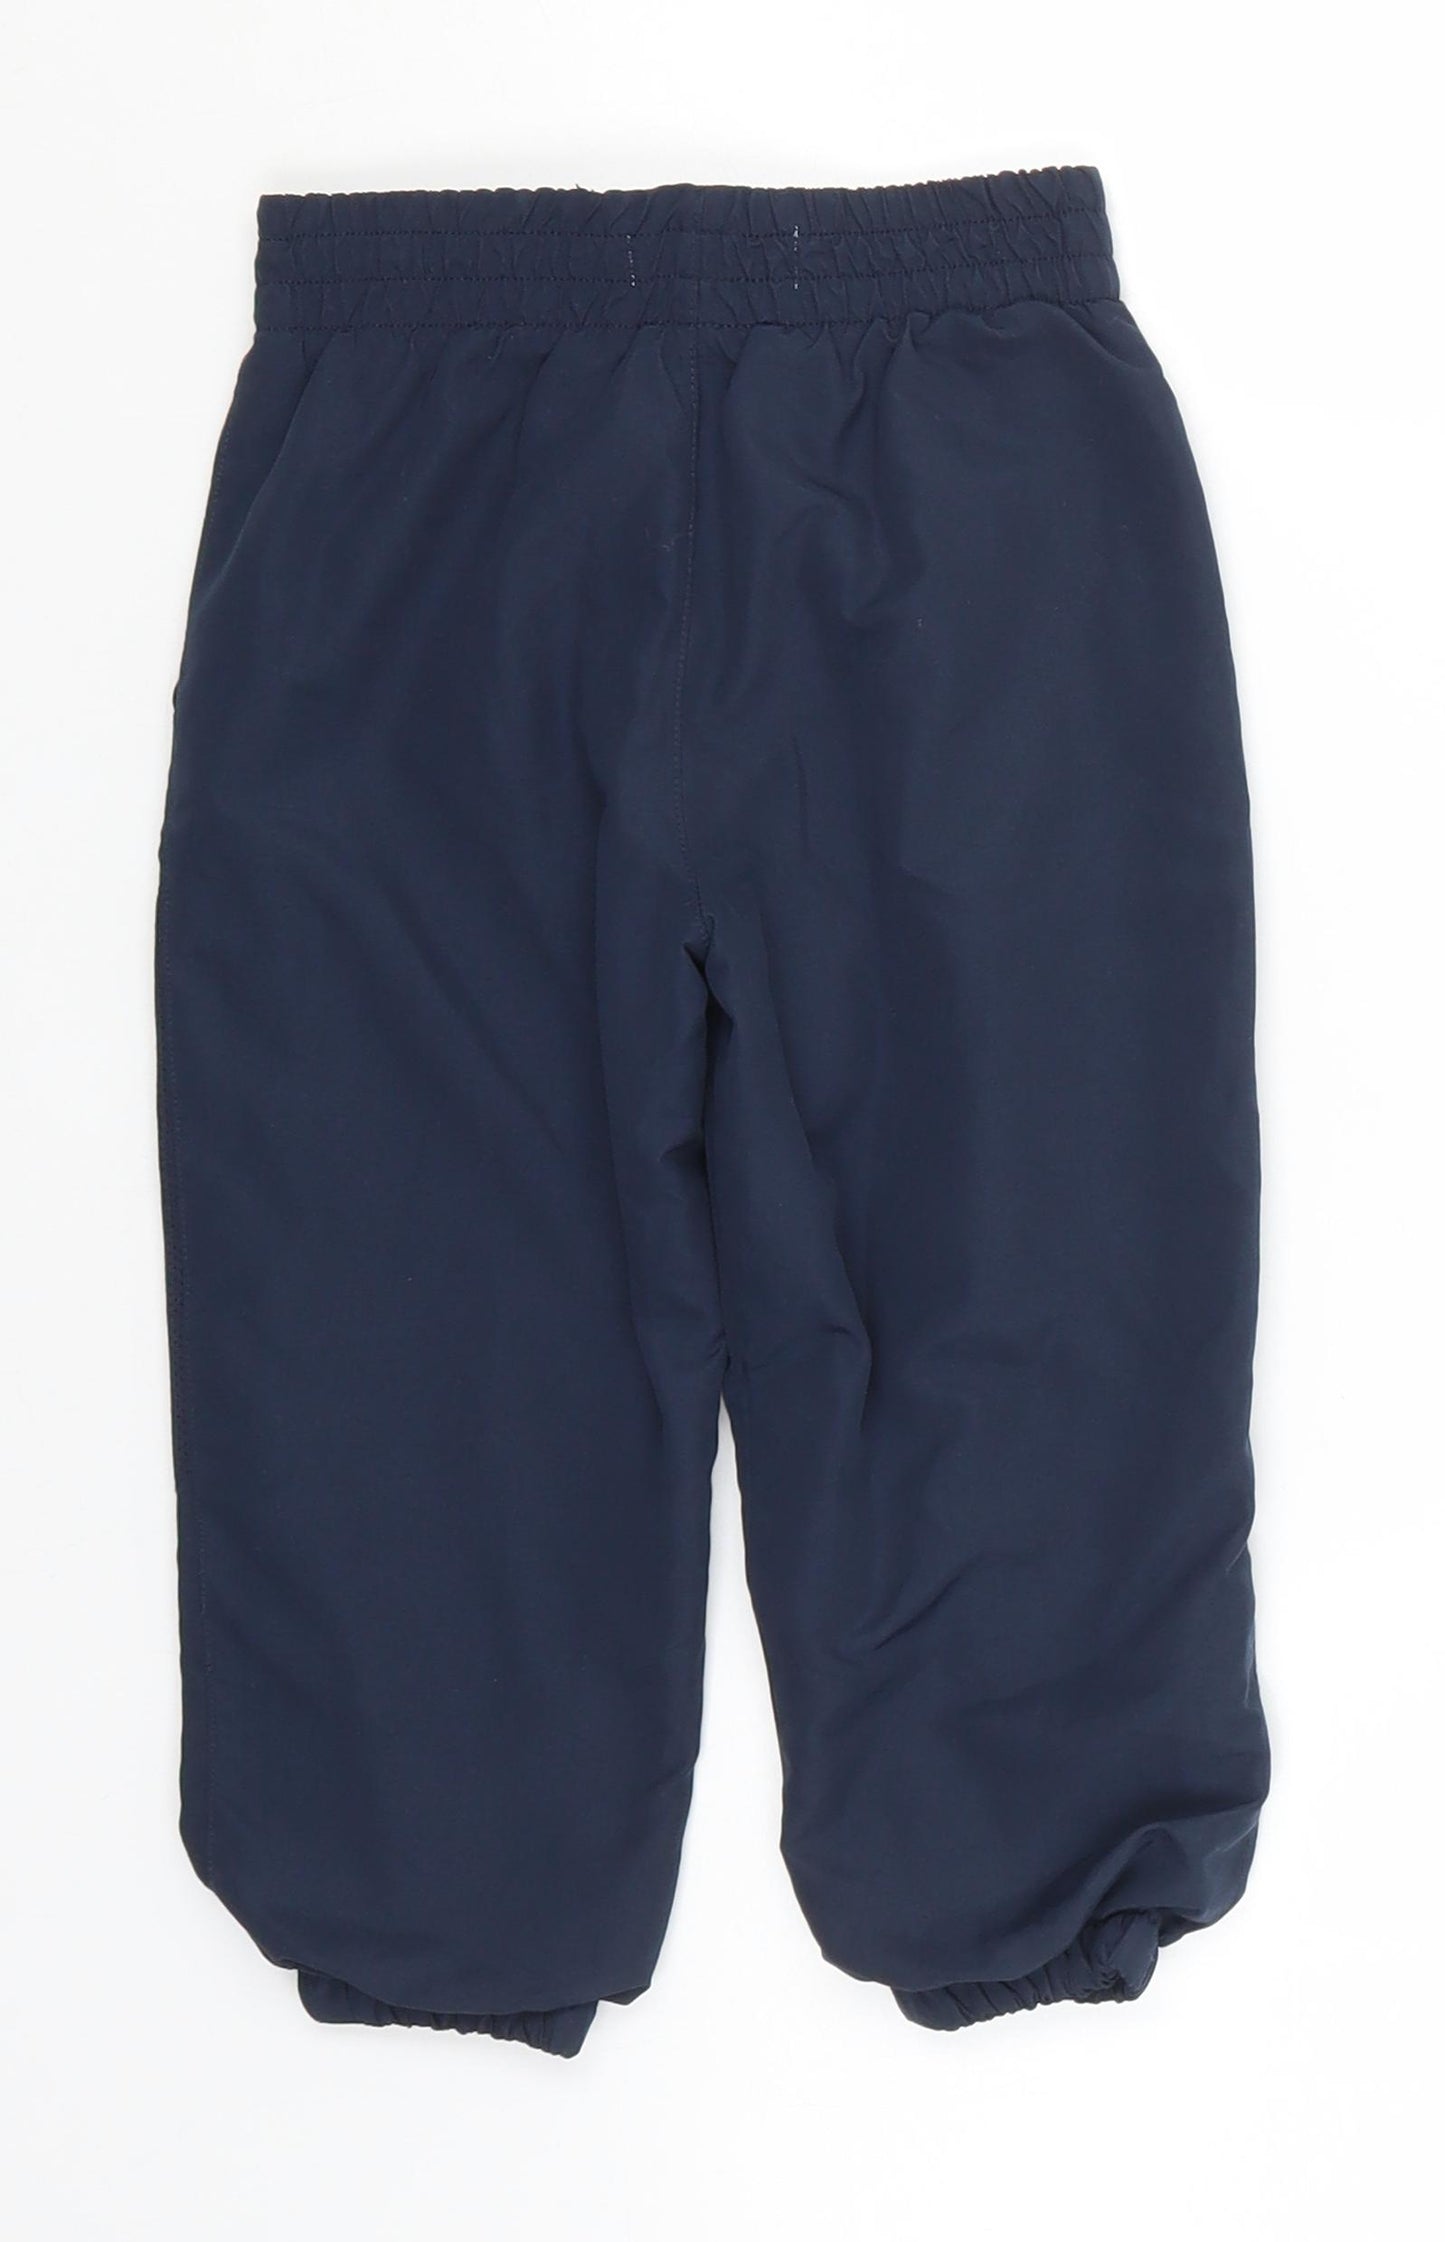 Primark Boys Blue  Polyester Chino Trousers Size 2-3 Years  Regular